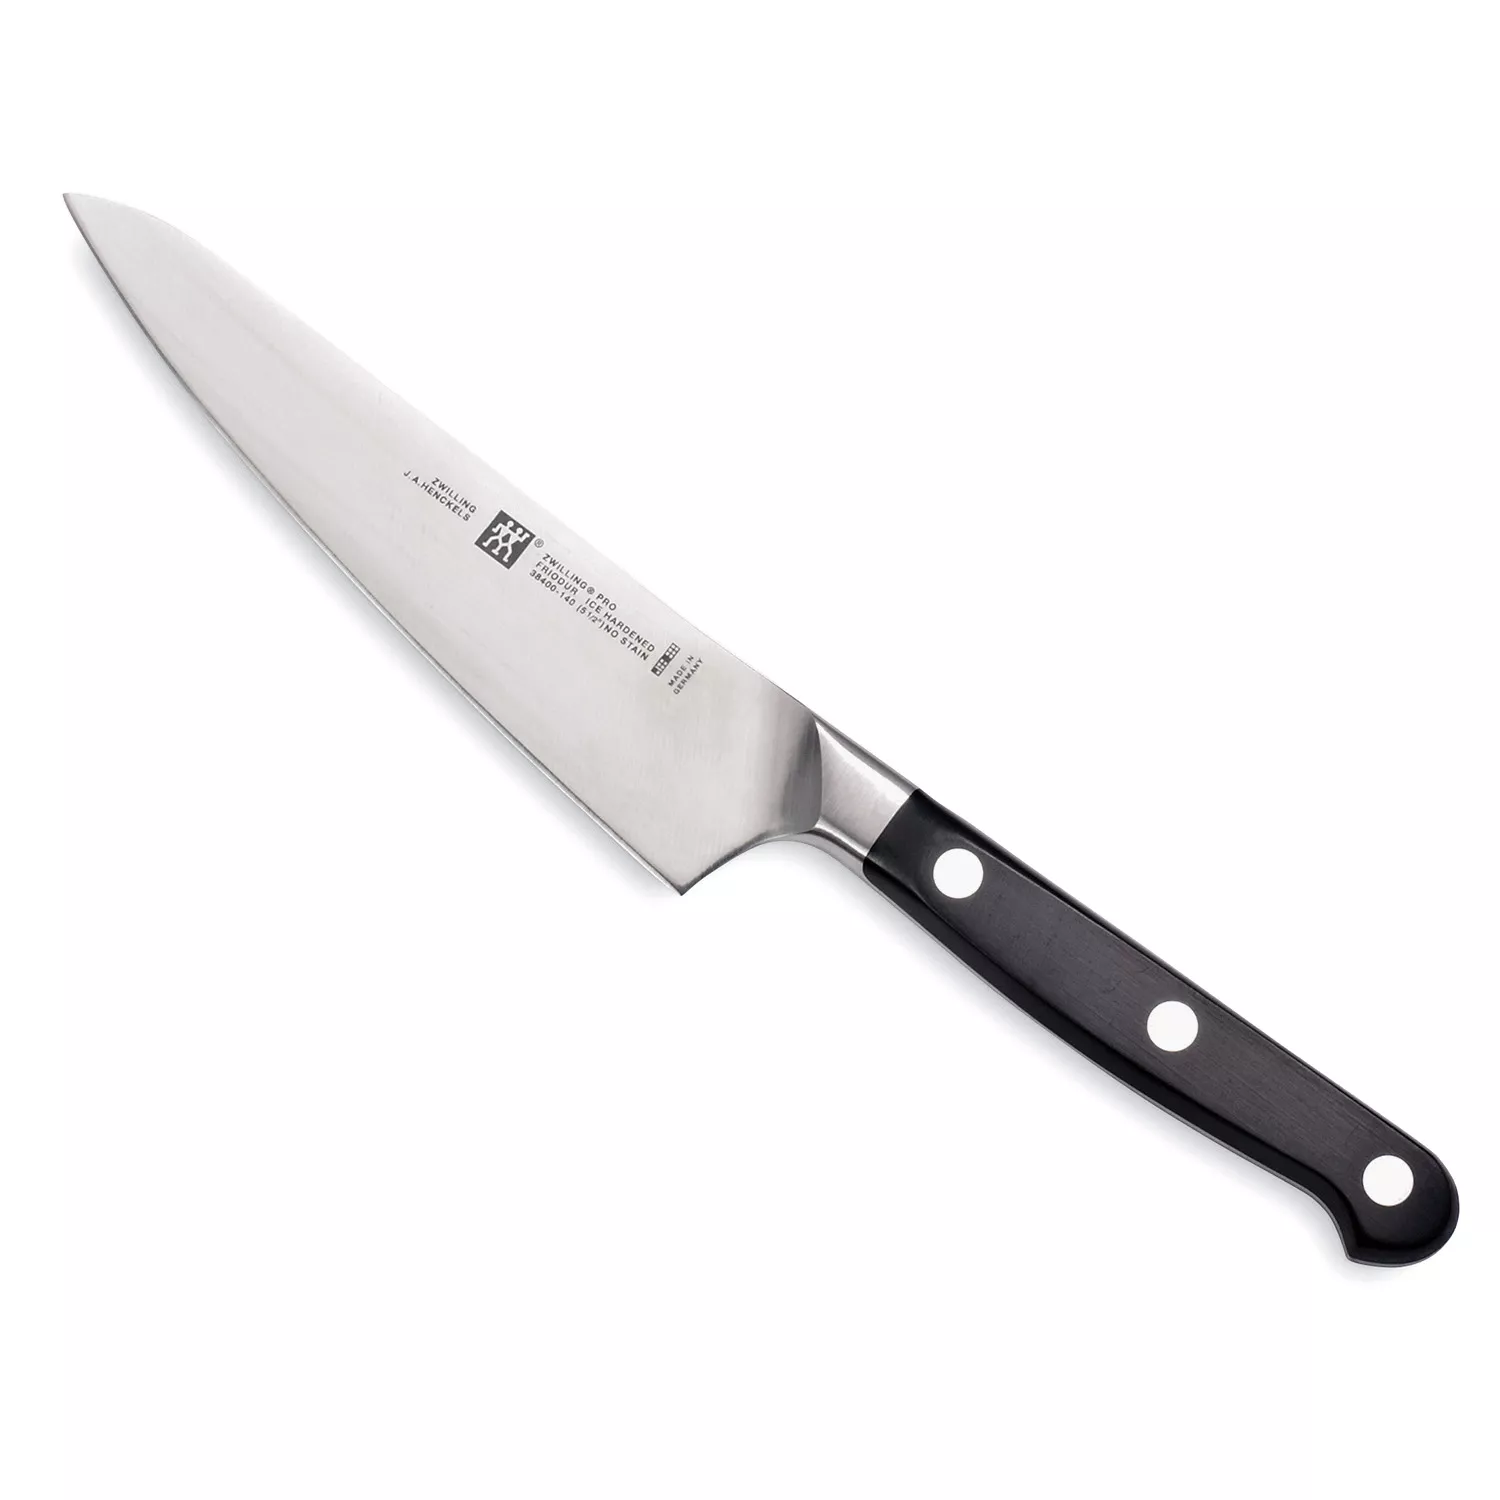 ZWILLING J.A. Henckels Pro Essential Prep Knives, 3 Styles, Stainless Steel  on Food52